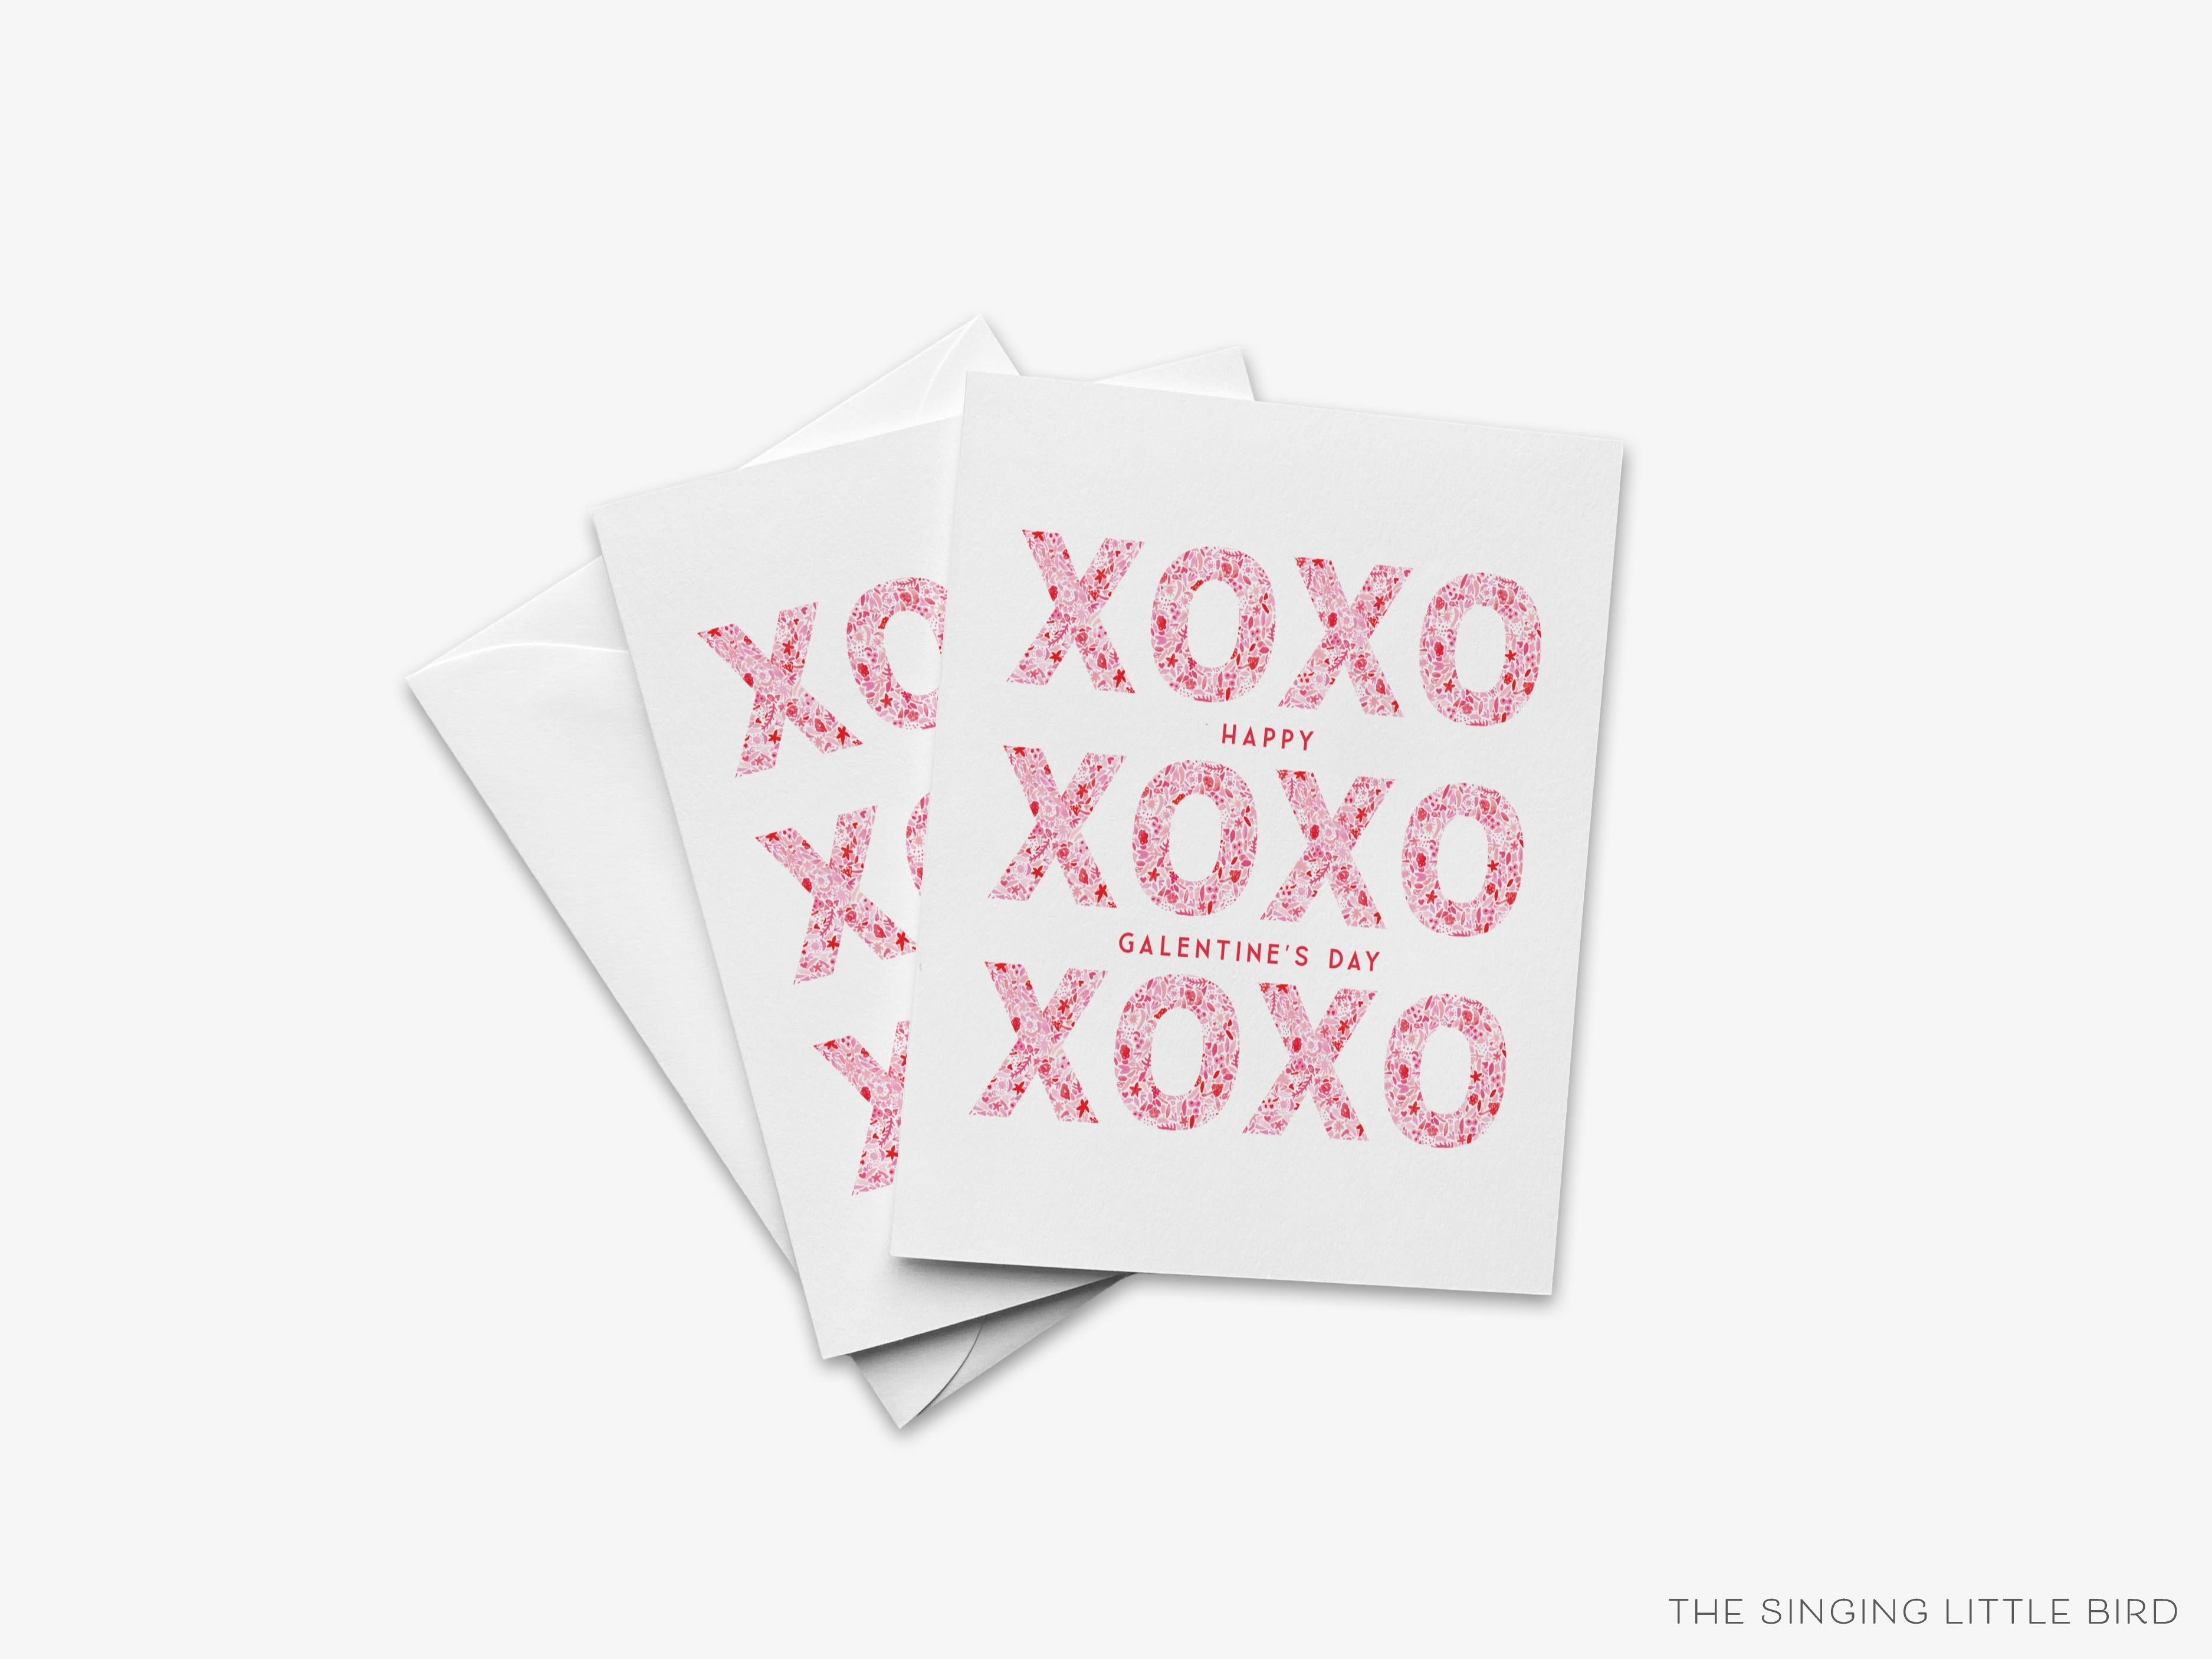 Galentine's XOXO Greeting Card-These folded greeting cards are 4.25x5.5 and feature our hand-painted pink and red pattern xoxo, printed in the USA on 100lb textured stock. They come with a White envelope and make a great Galentine's Day card for the gal pal in your life.-The Singing Little Bird